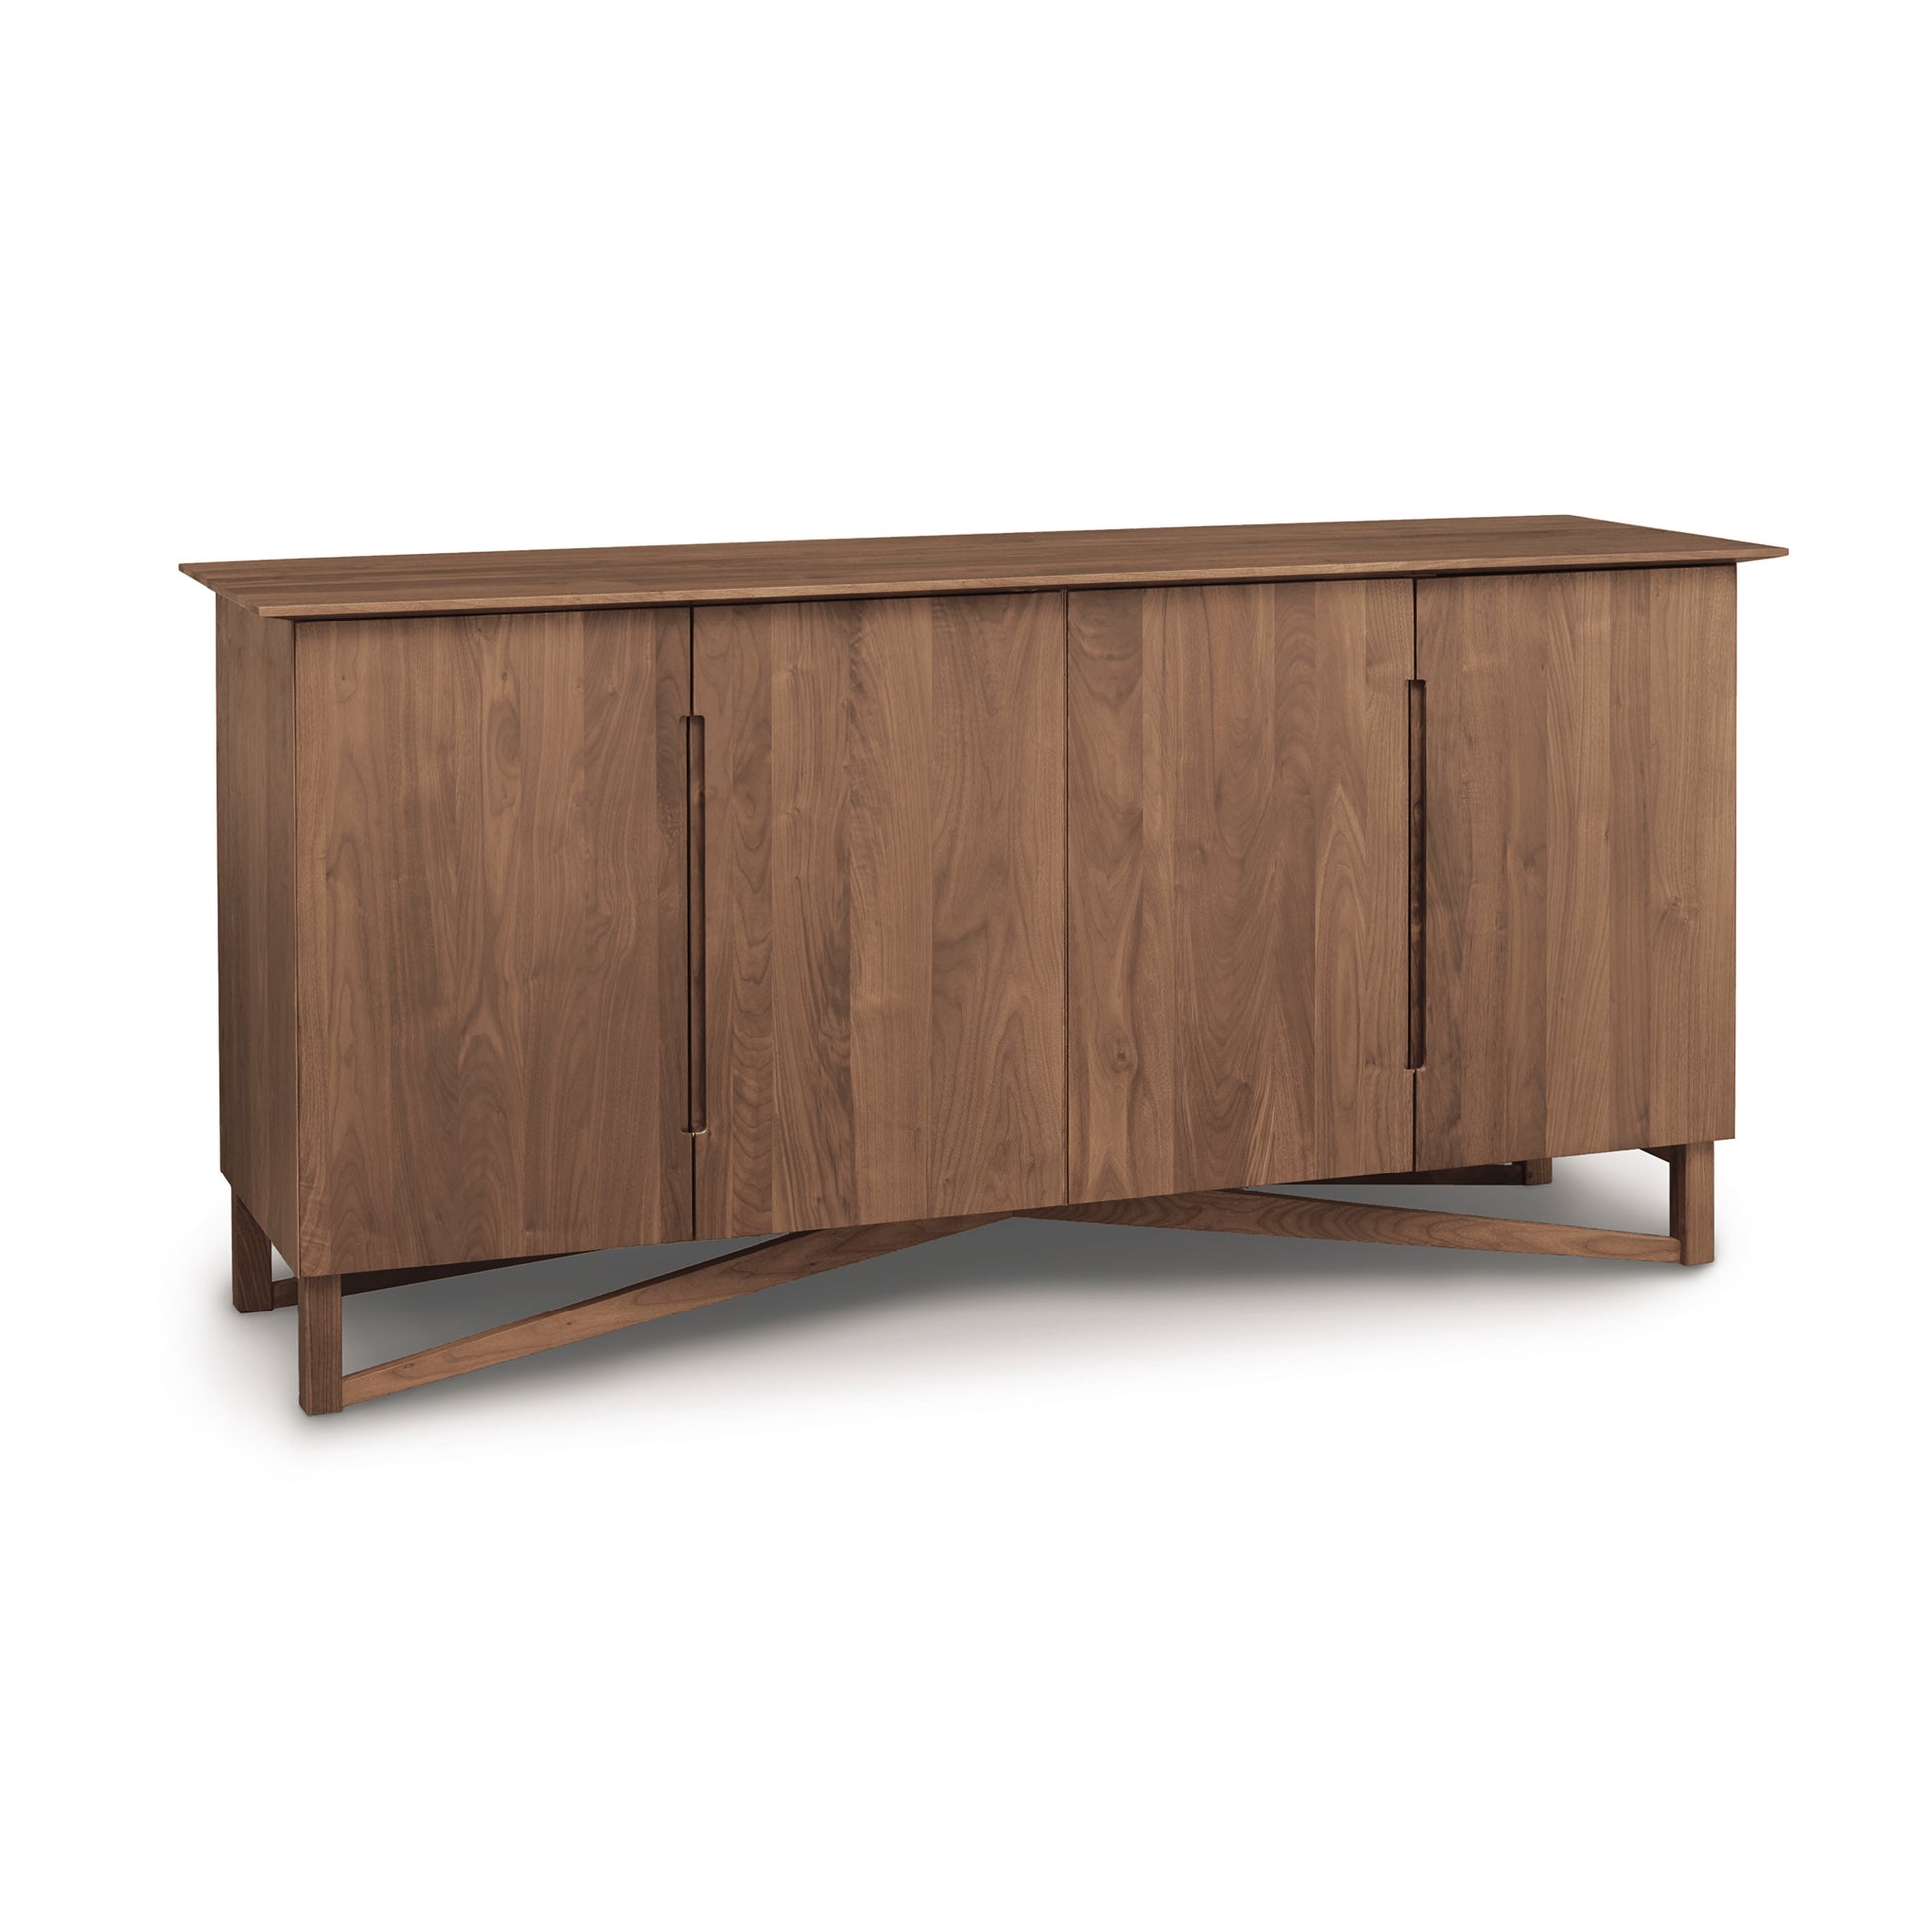 A solid natural hardwood Exeter Buffet from the Copeland Furniture Collection, with three doors and an angular leg design, isolated on a white background.